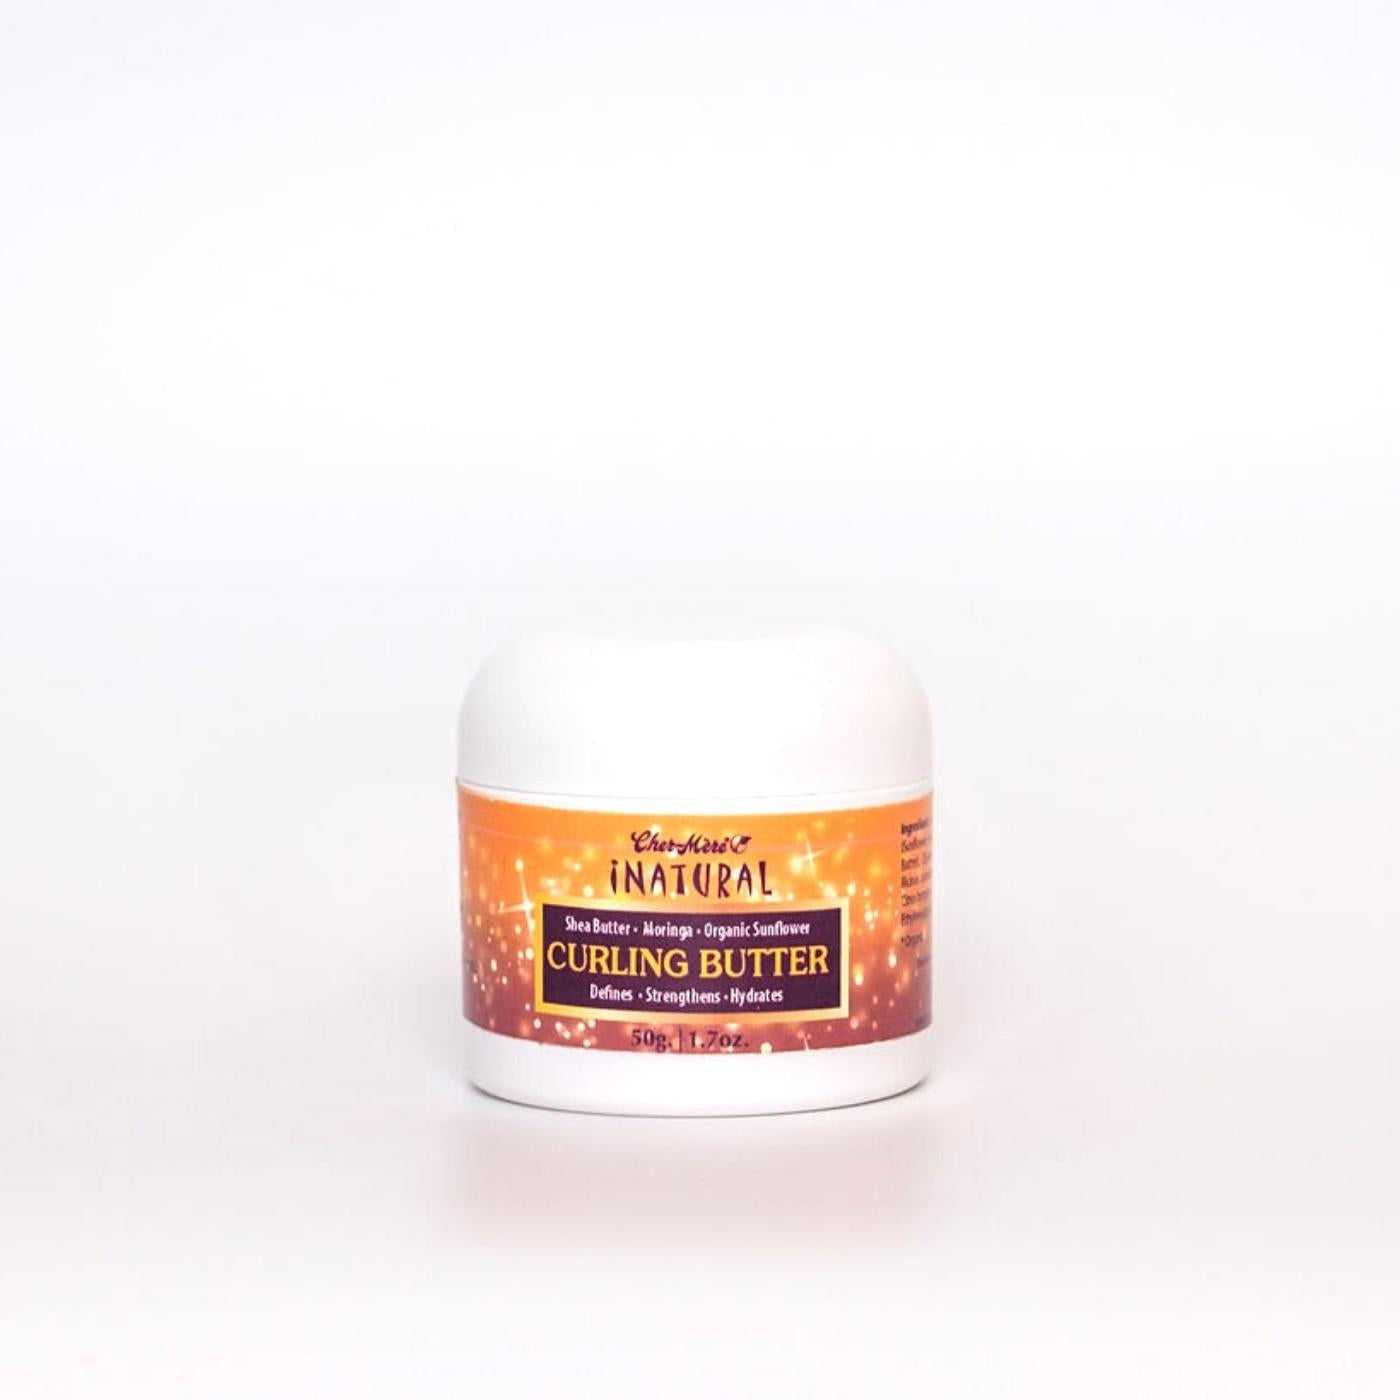 INATURAL Curling Butter